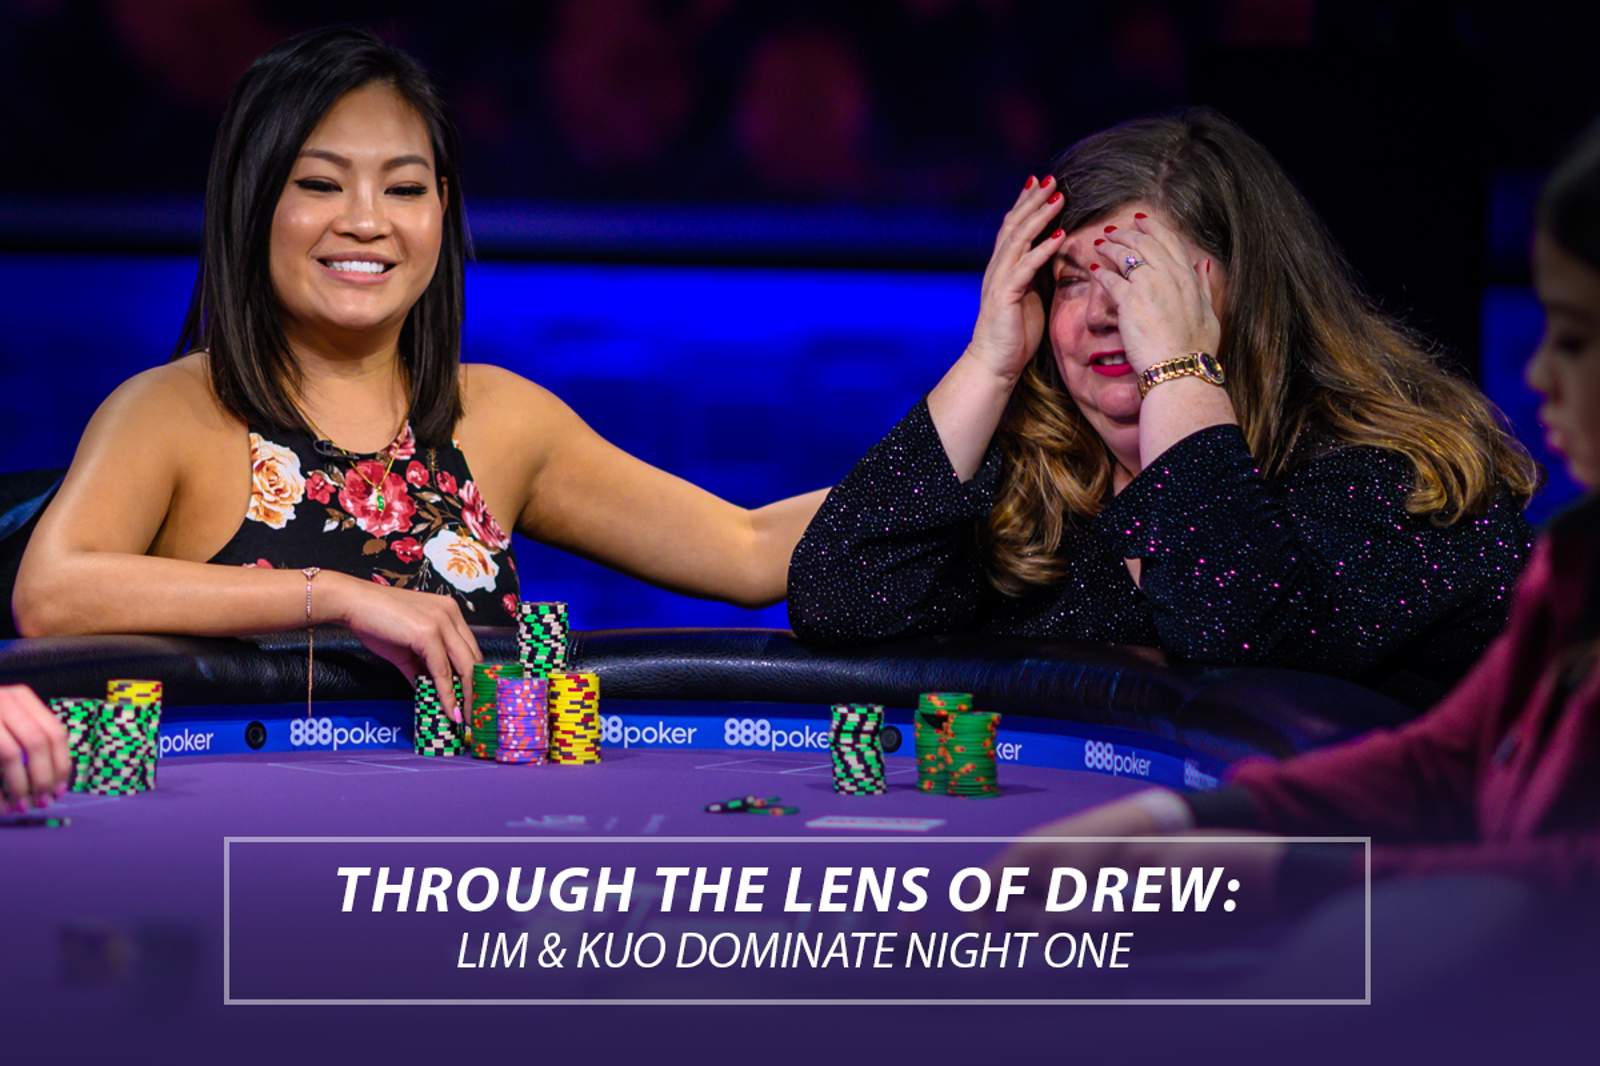 Through the Lens: Lim & Kuo Dominate Night One